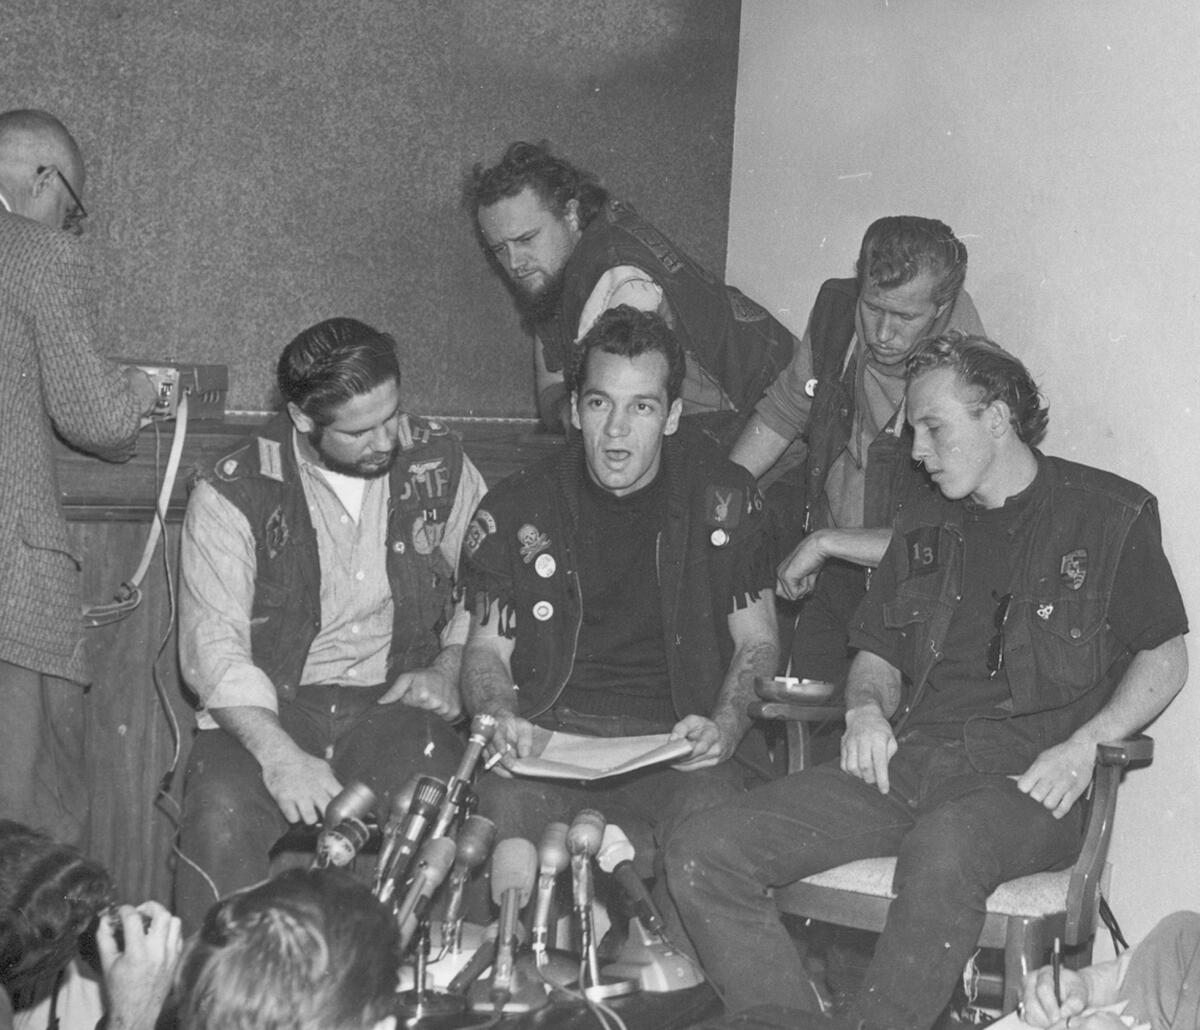 Ralph "Sonny" Barger, president of the Oakland chapter of the Hell's Angels